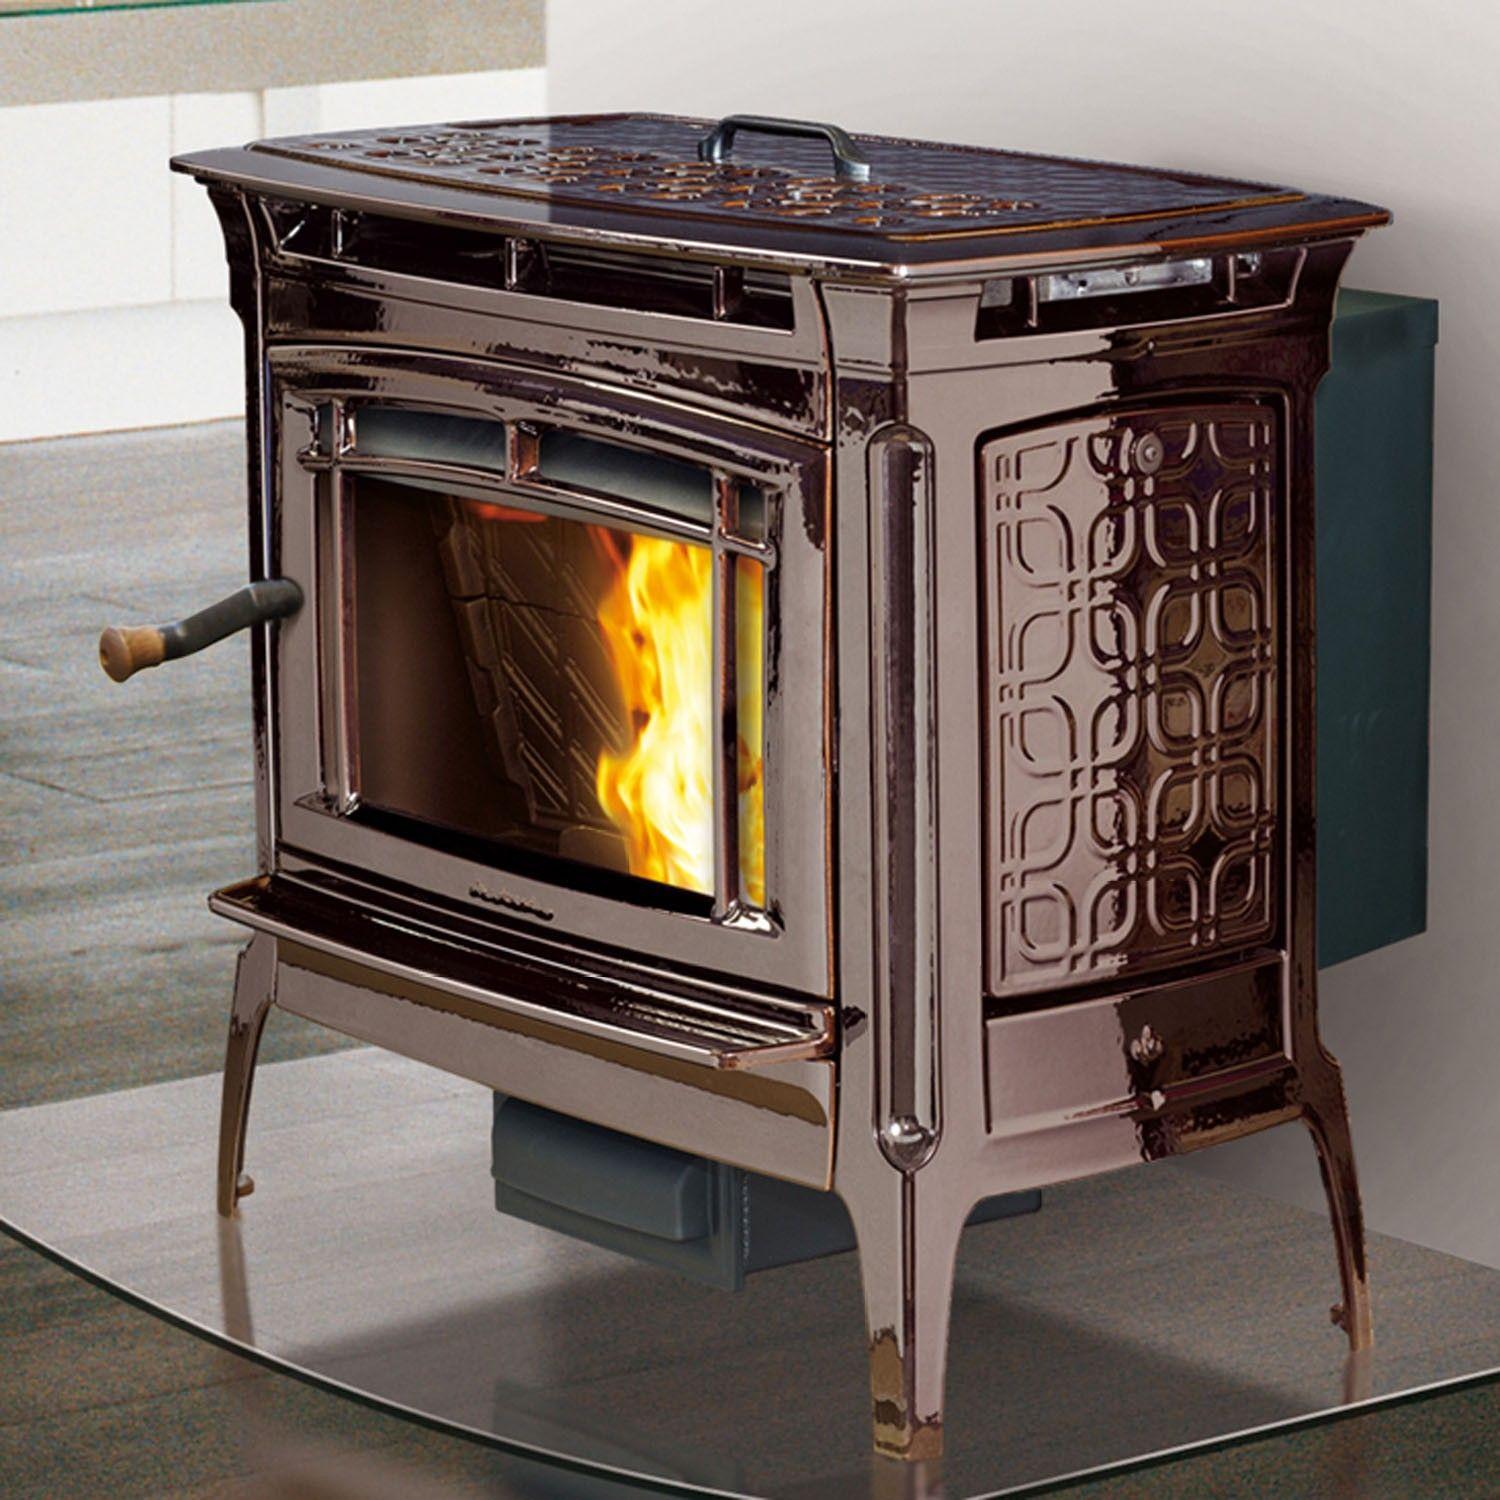 Harman Stove Logo - Hearthstone Manchester Wood Pellet Stove Sales and Service